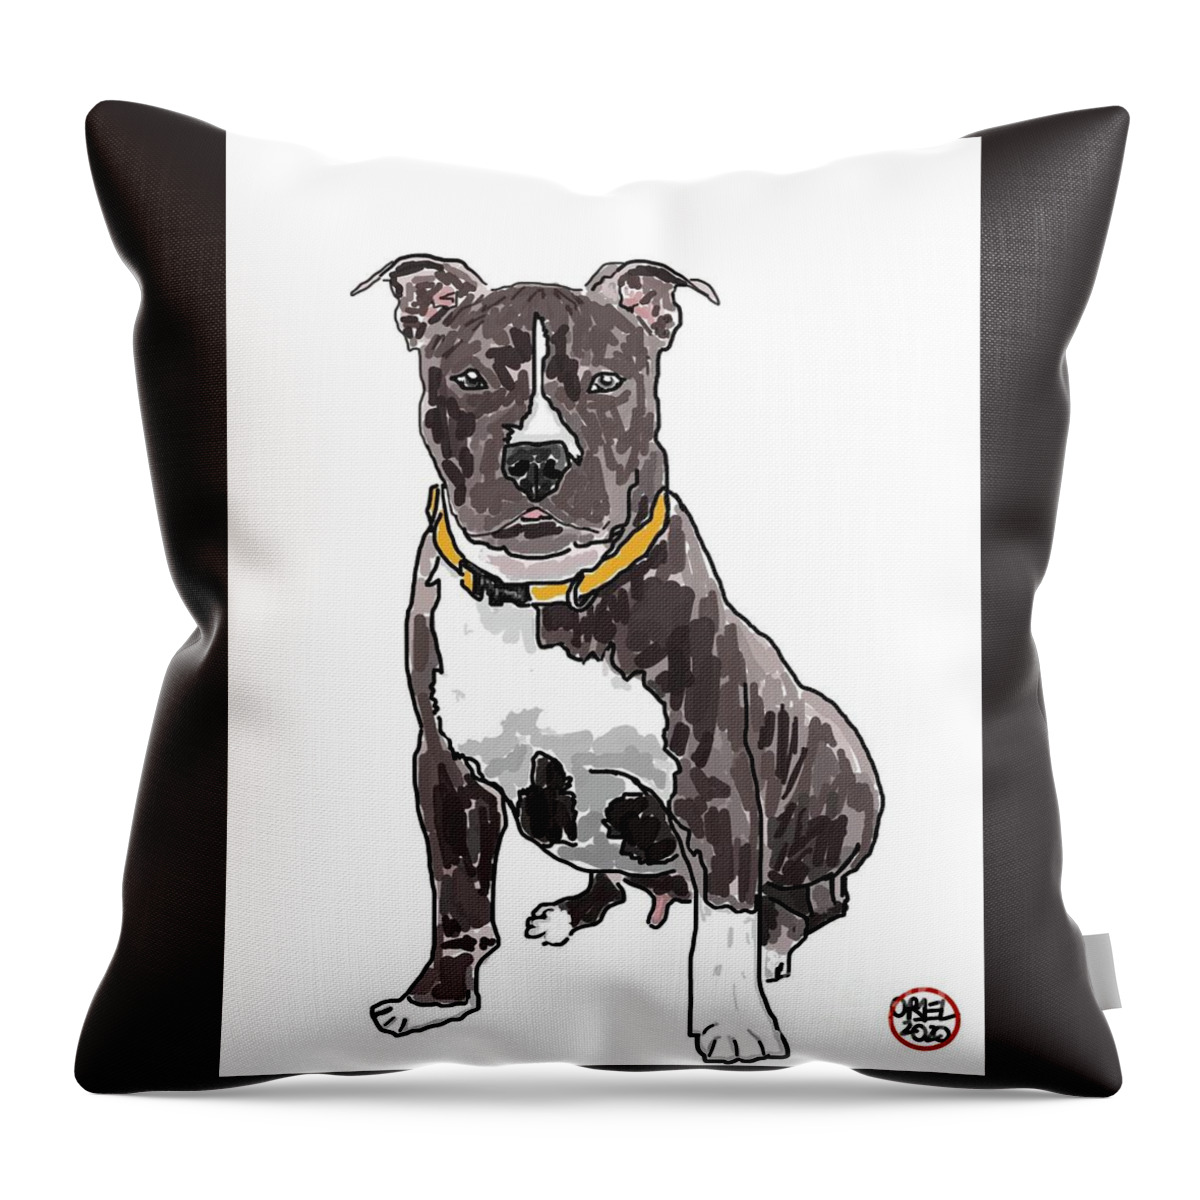  Throw Pillow featuring the painting Dog by Oriel Ceballos